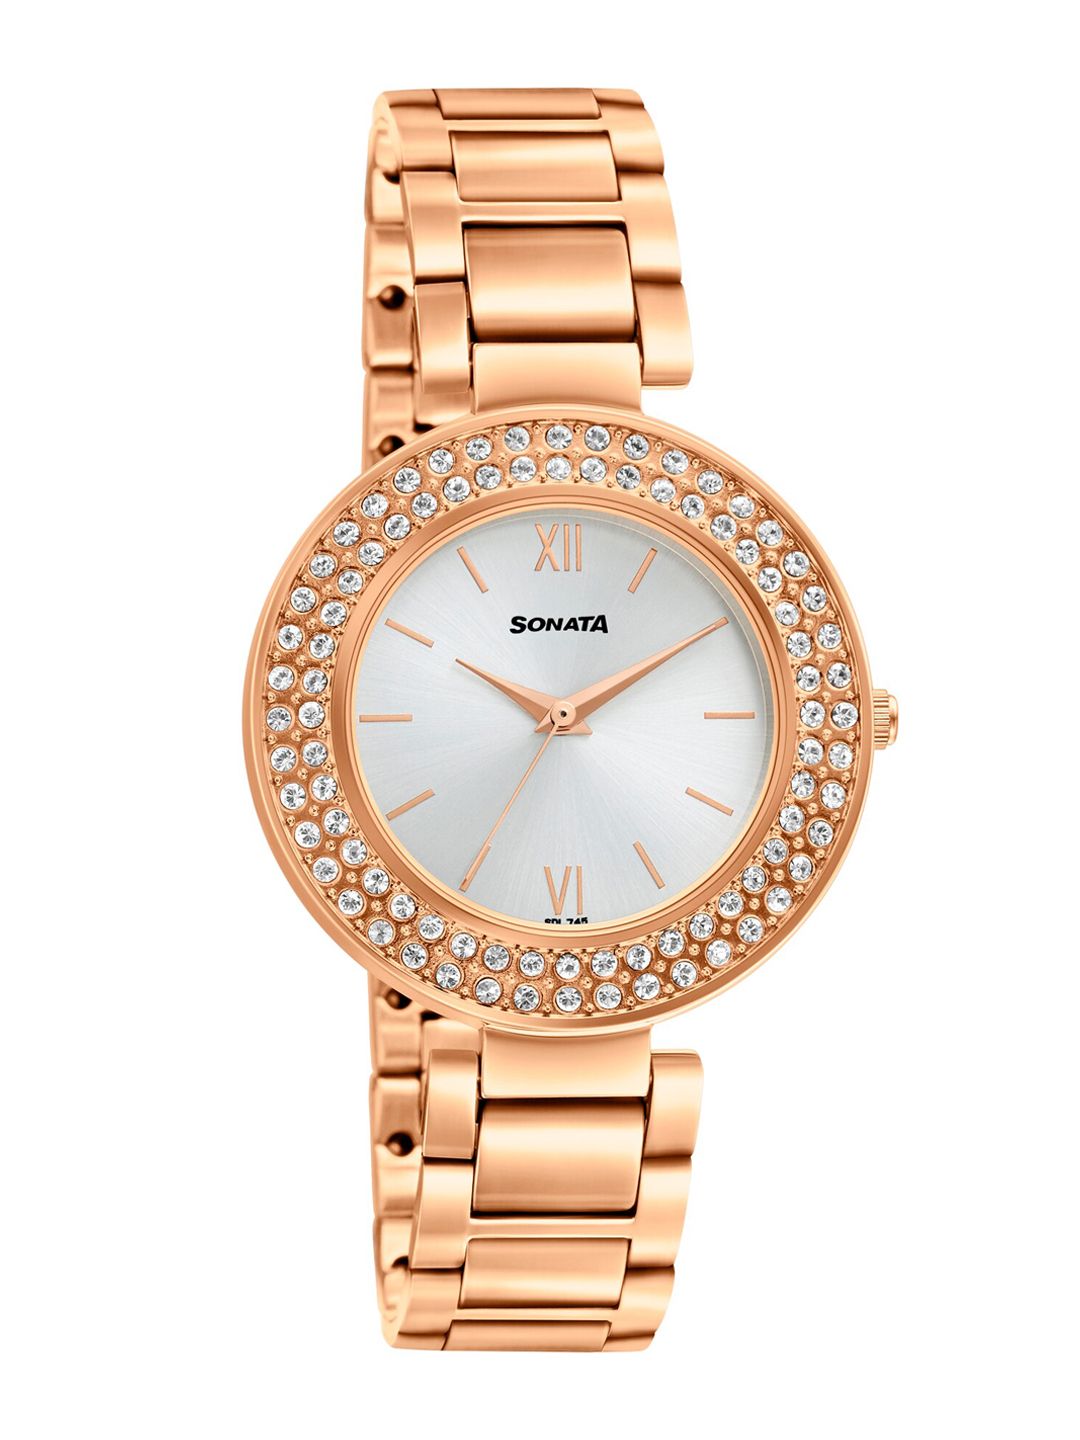 Sonata Women Silver-Toned & Rose Gold Analogue Watch 87033WM02 Price in India